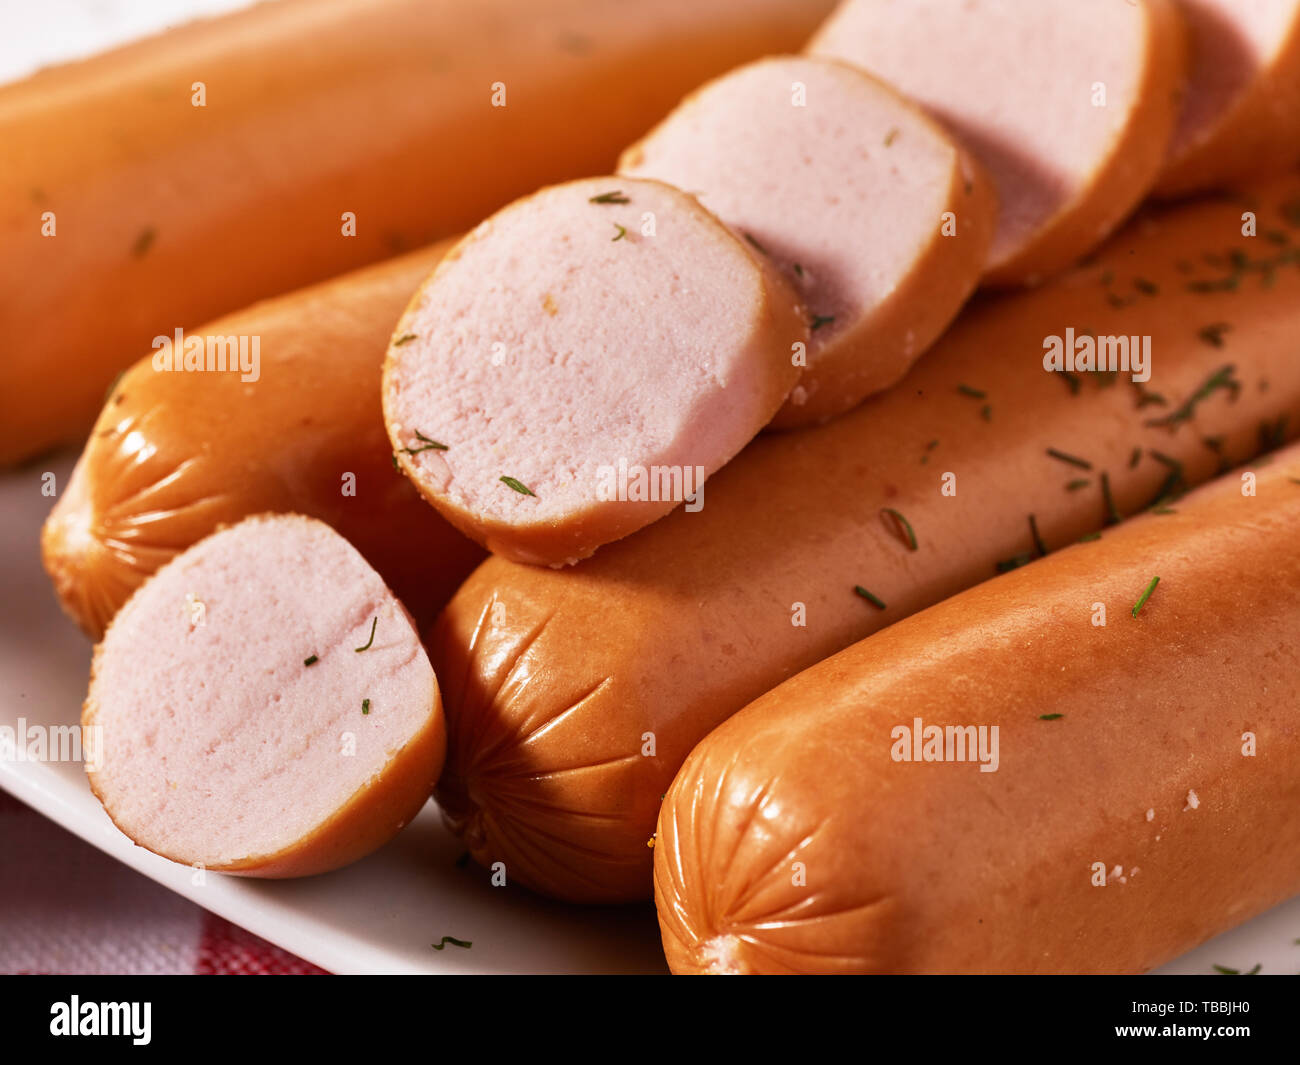 Sausages cut into pieces with spice Stock Photo